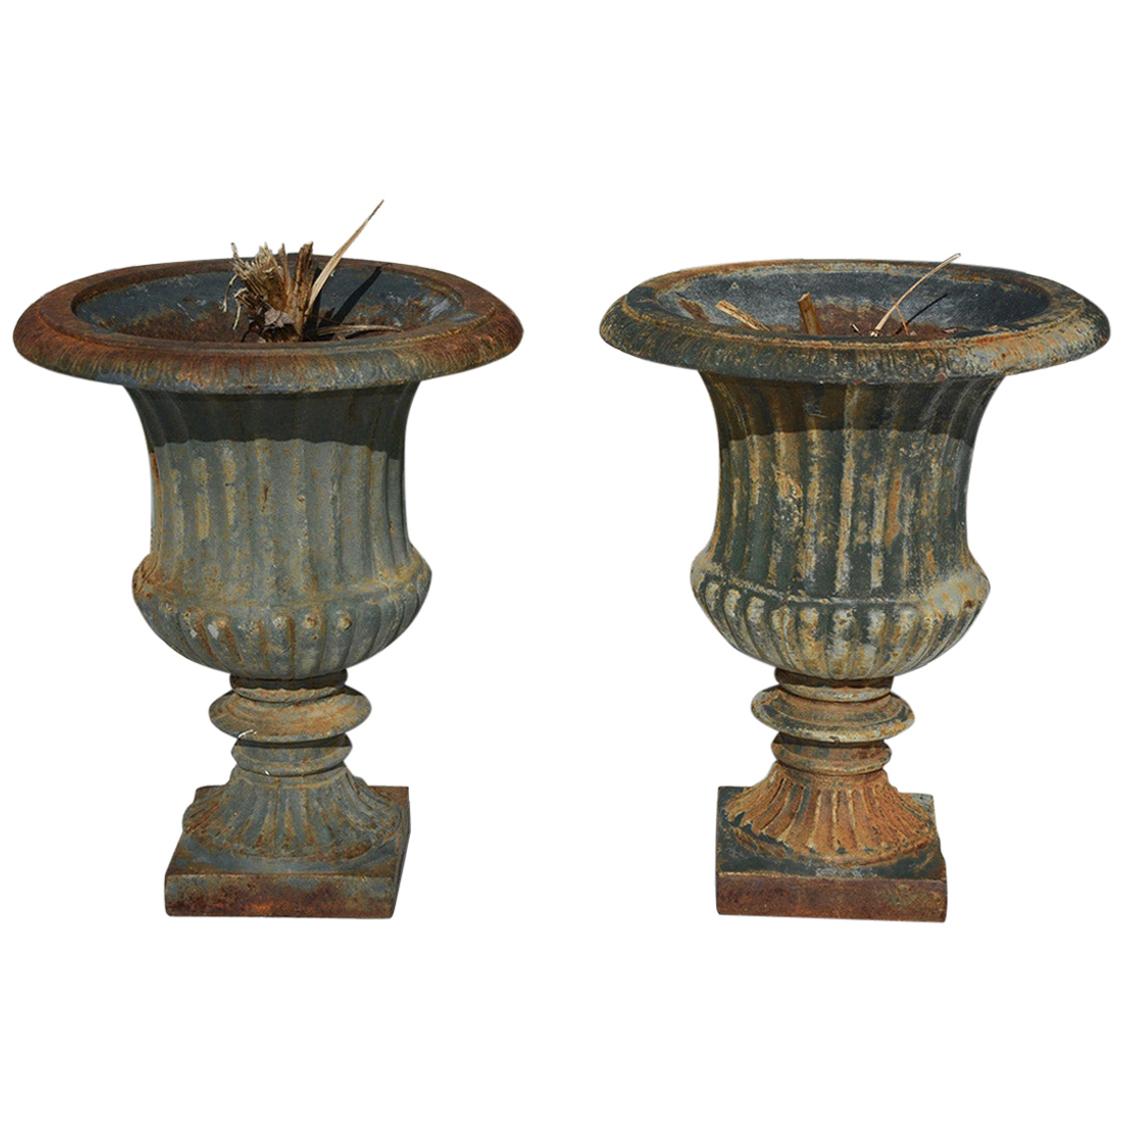 Pair of 19th Century French Cast Iron Urns